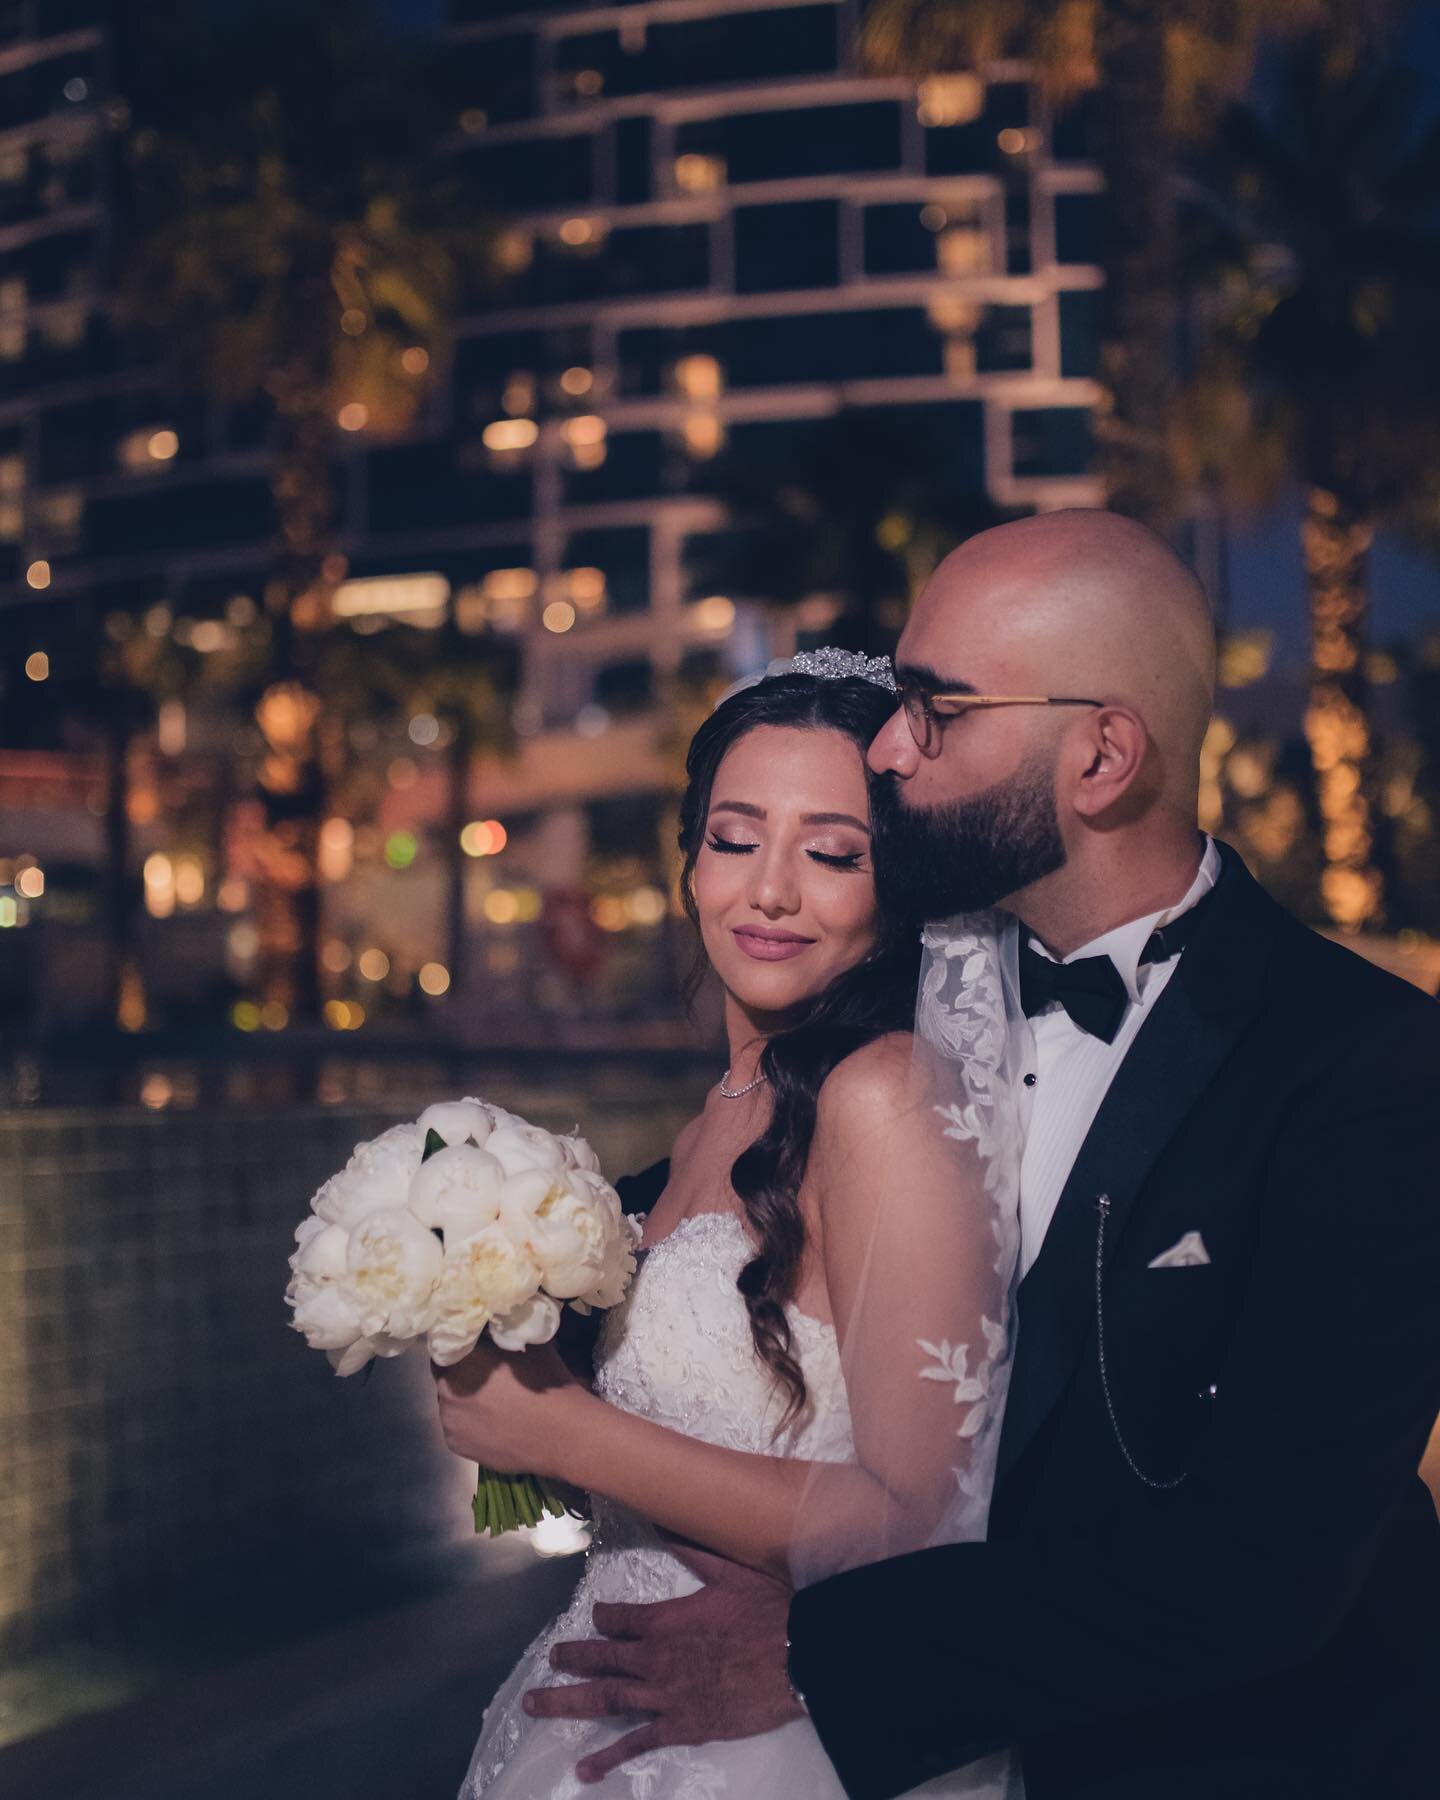 Government just stopped all events starting tomorrow. Last wedding was yesterday. 

#nikonprophotographer #nikon #dubaiwedding #dubaiweddings #dubaiweddingphotographer #bride #bridegettingready #groom #wedding